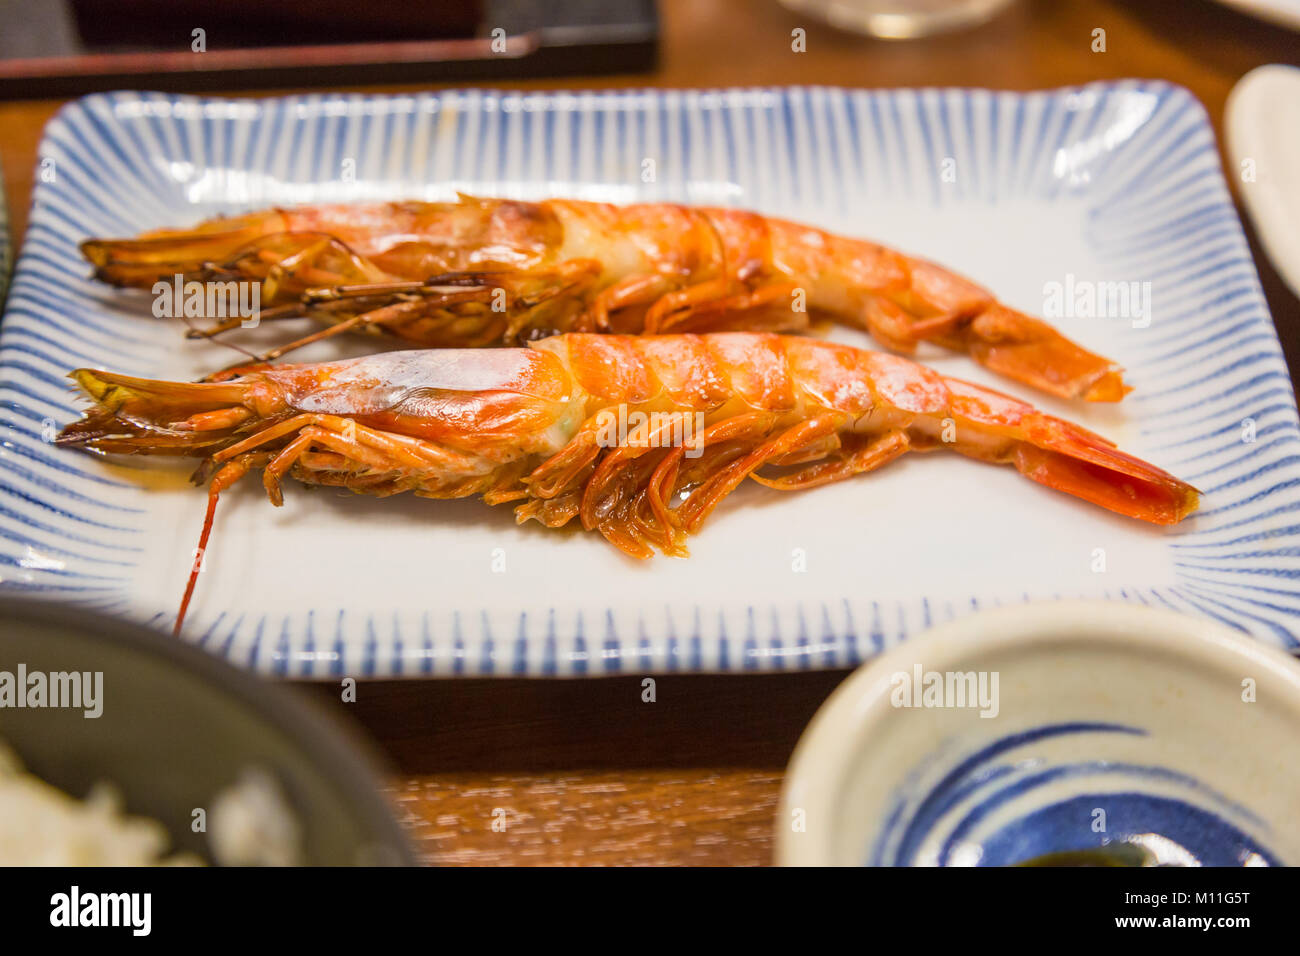 Two fully cooked grilled shrimps on a white plate, served along with many other Japanese dishes Stock Photo